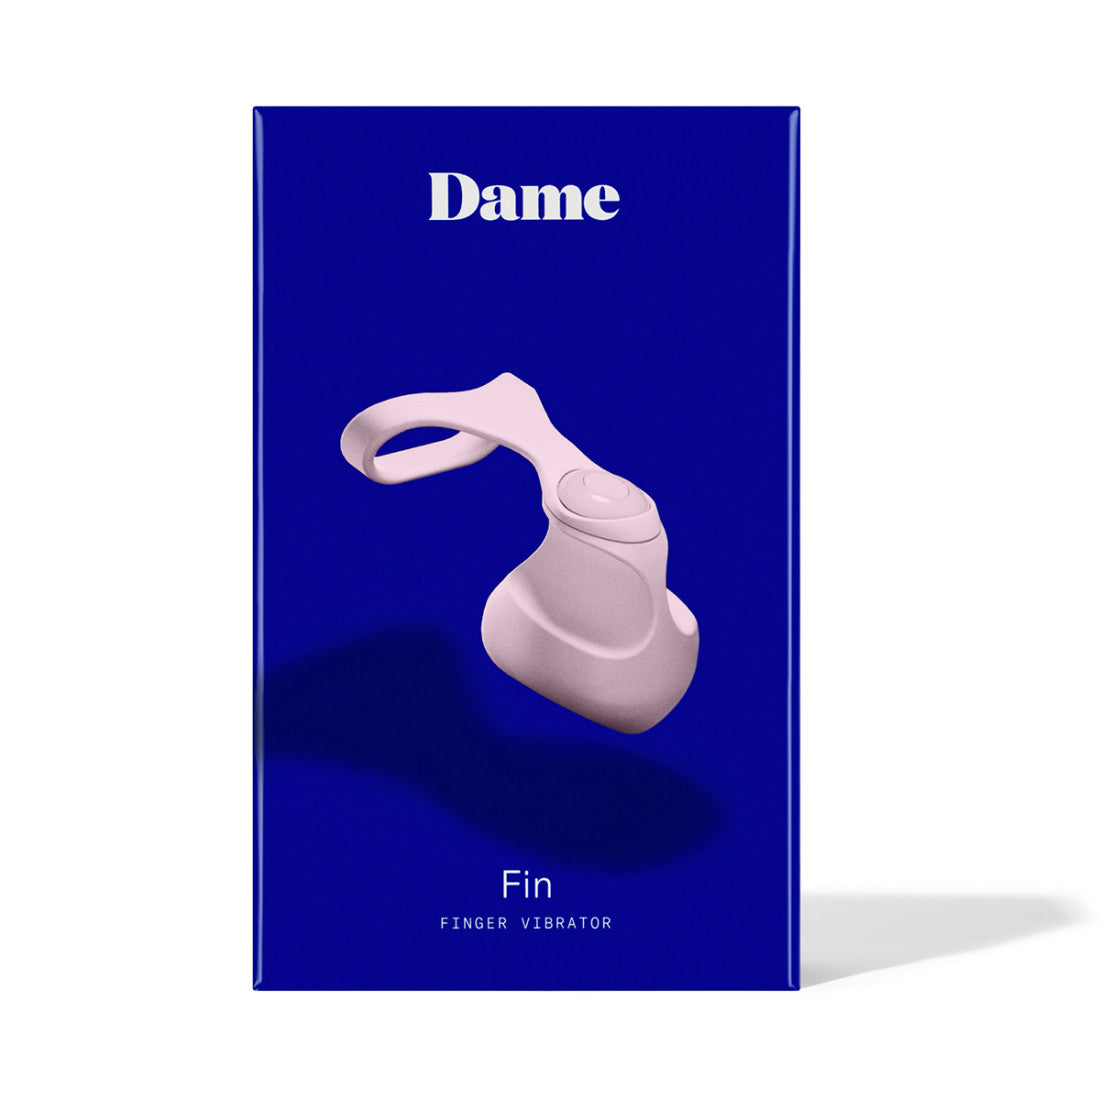 Fin by Dame